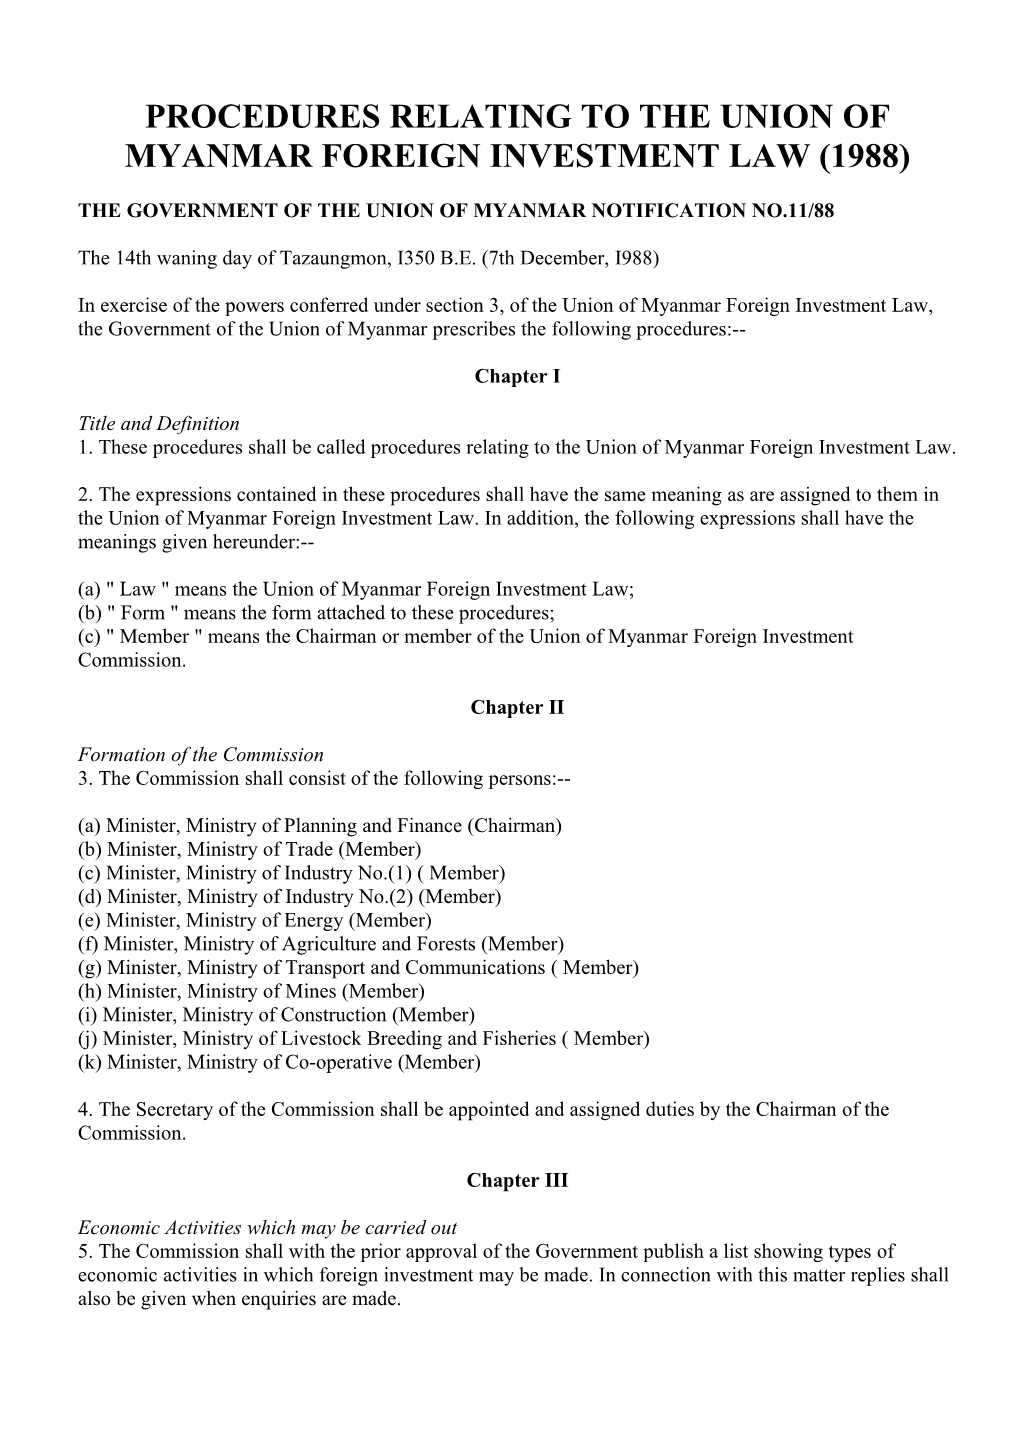 Procedures Relating to the Union of Myanmar Foreign Investment Law (1988)